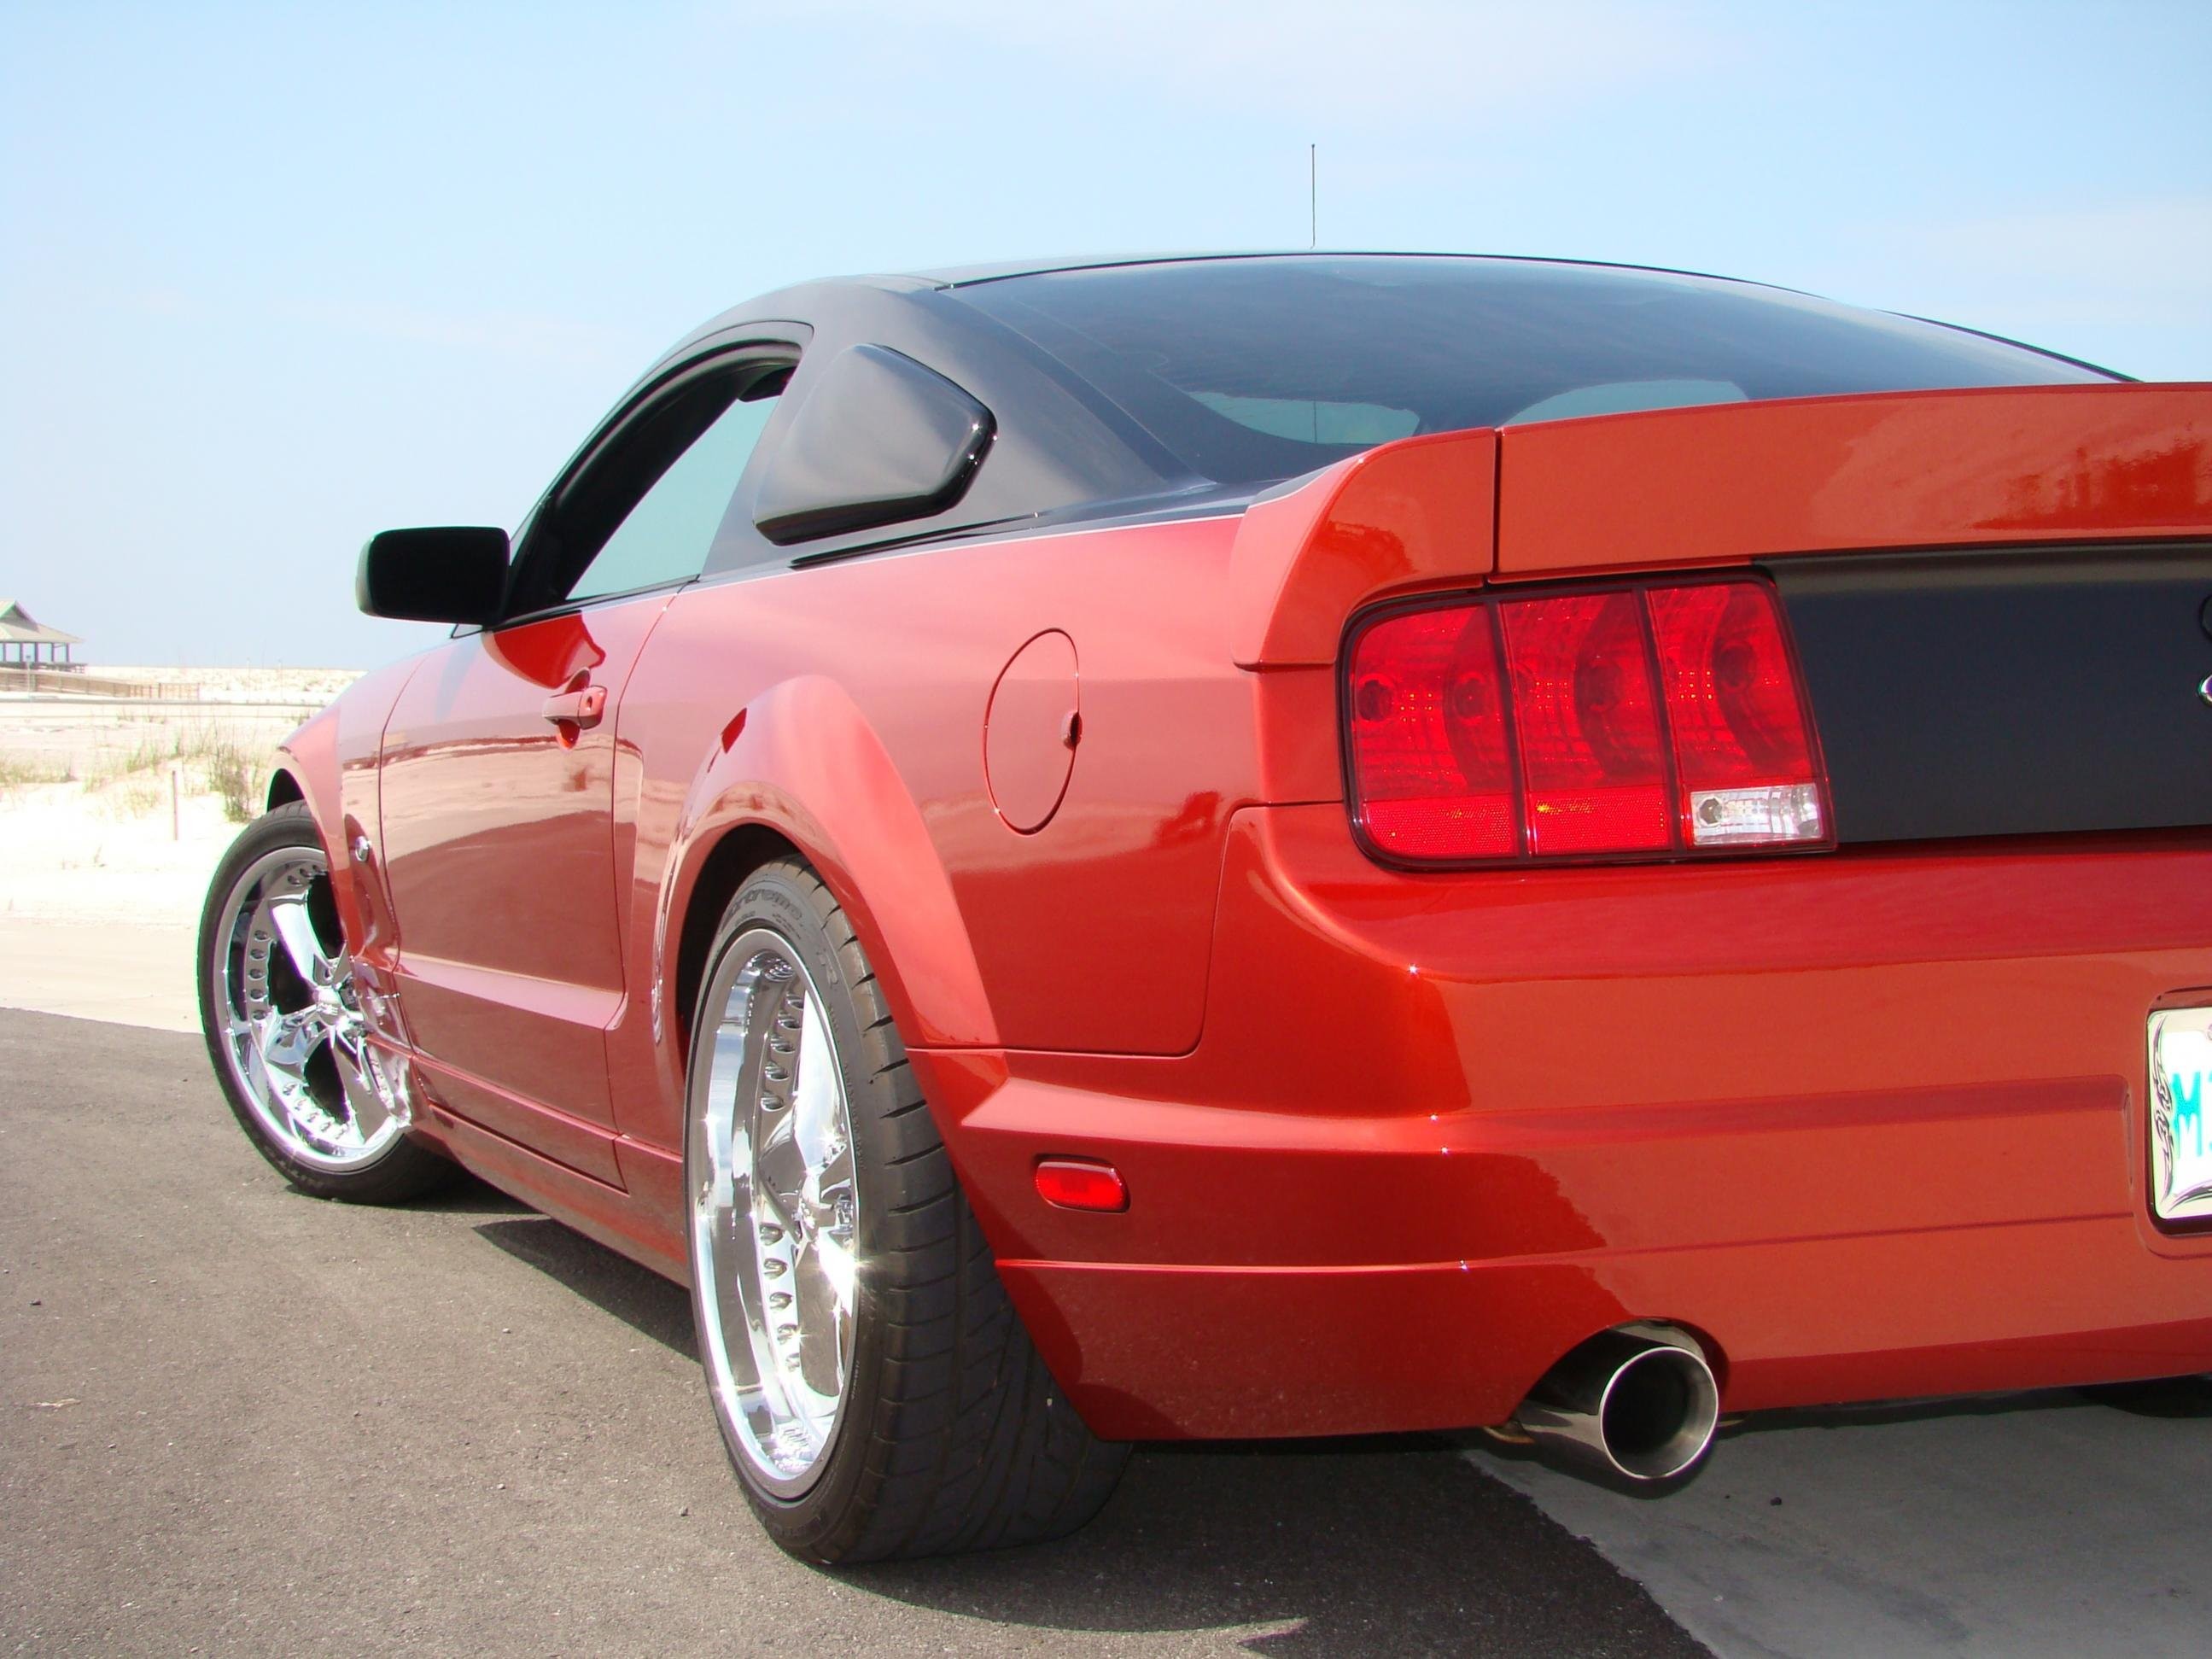 2006 Foose Design Mustang Stallion Ford Tuning Muscle Hot 2591x1943